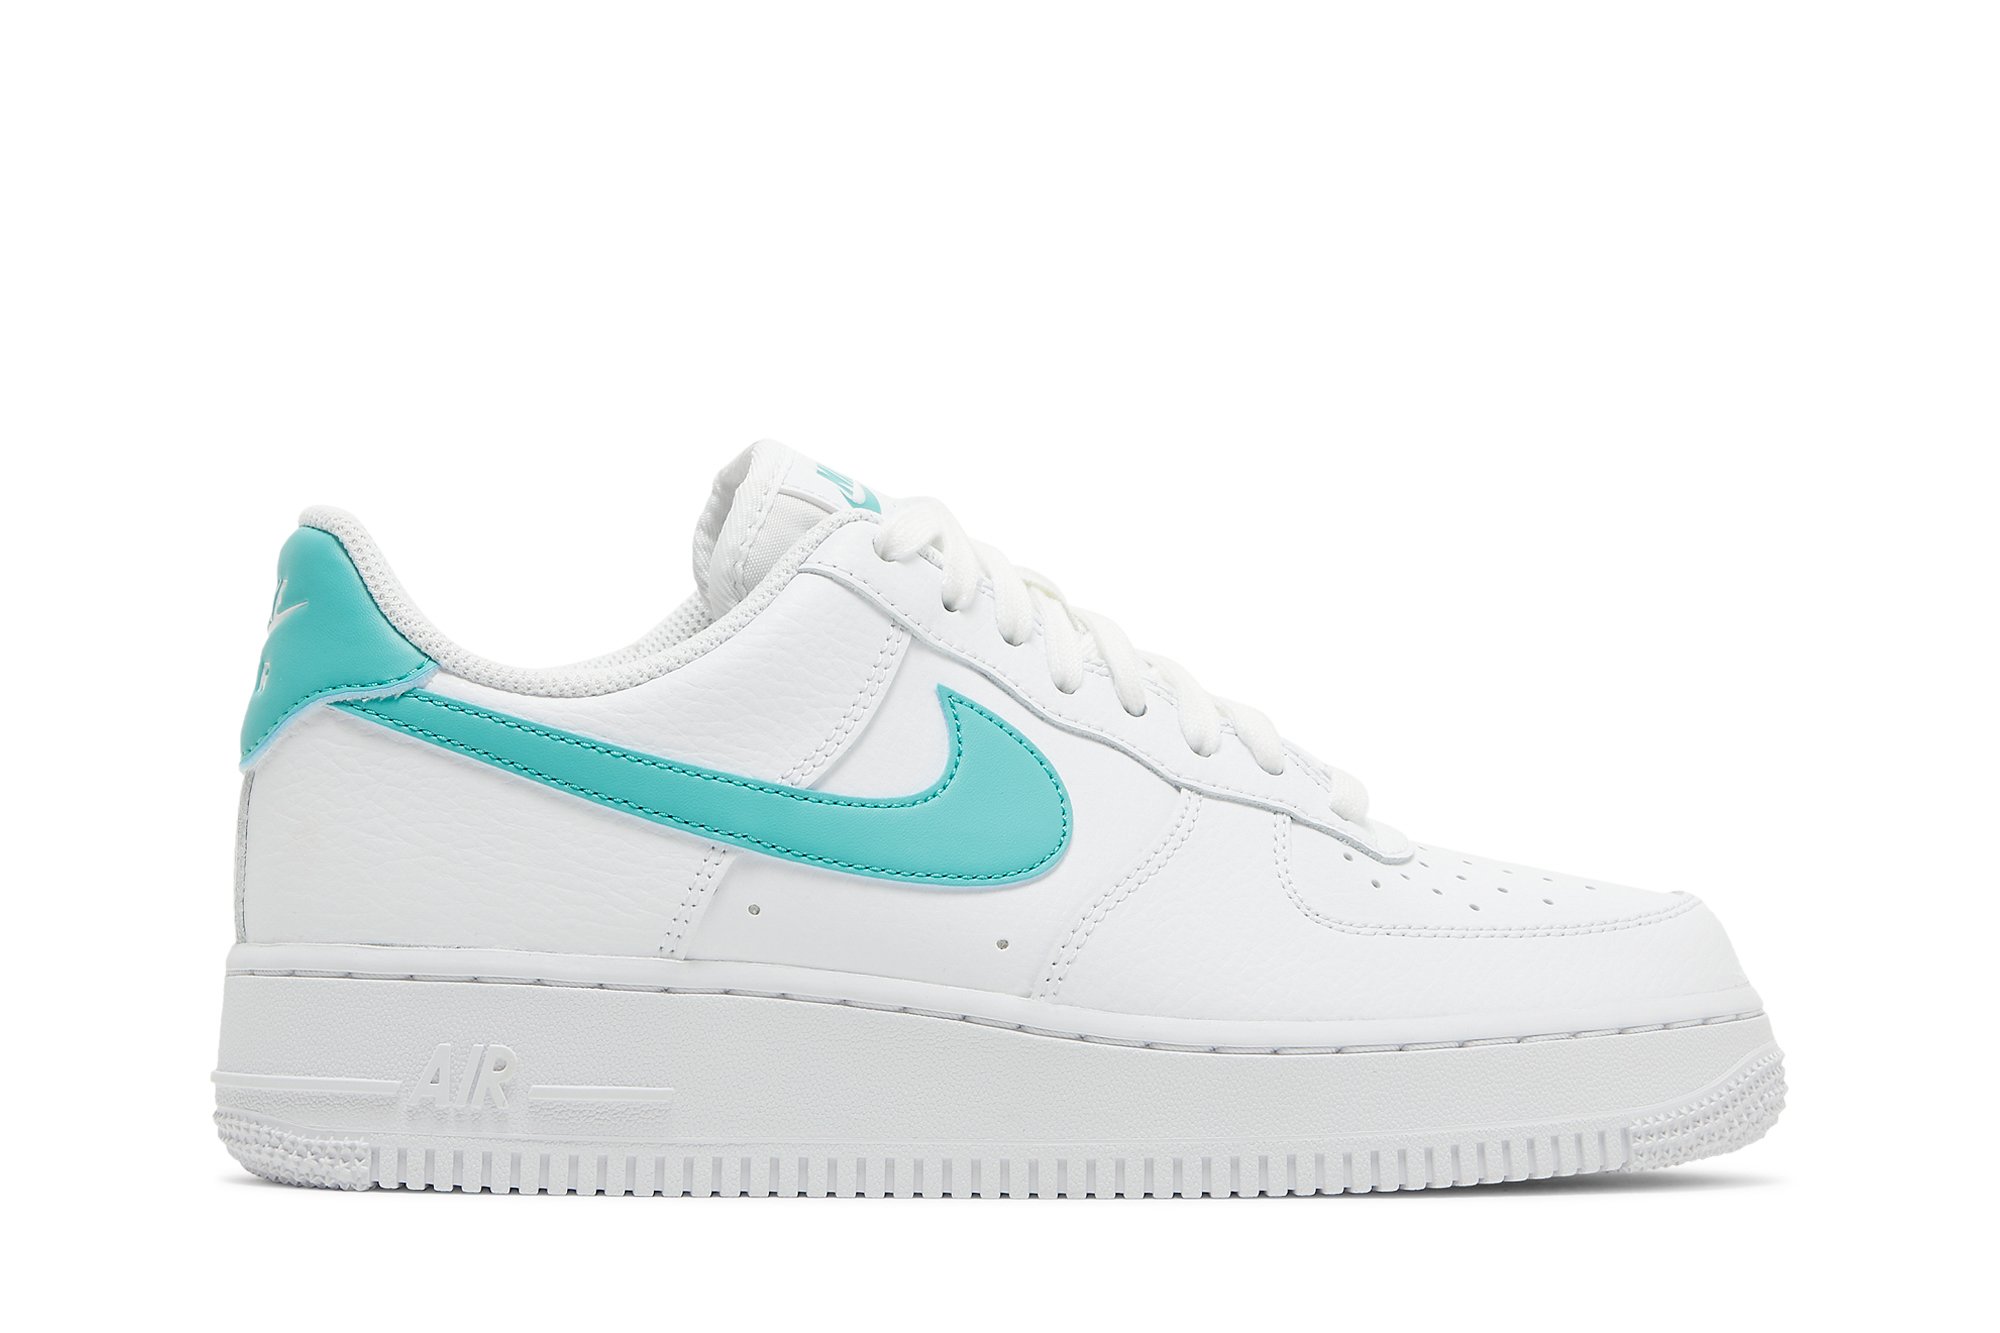 Wmns Air Force 1 '07 'White Washed Teal' | GOAT